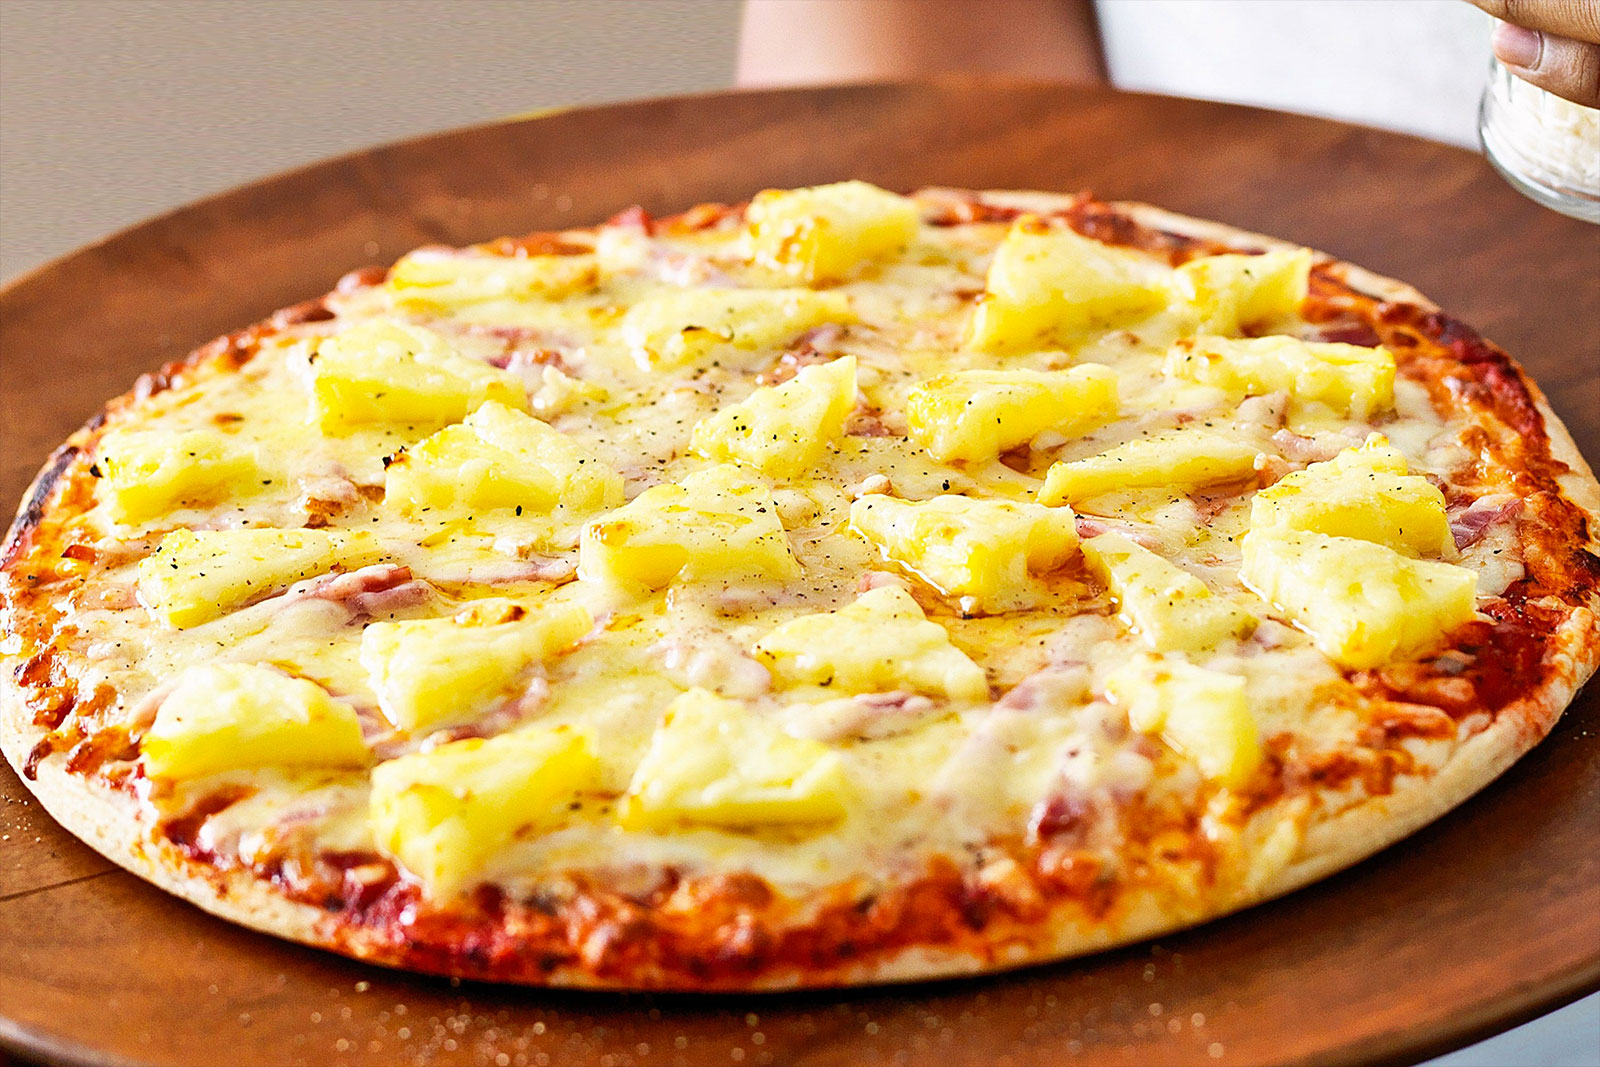 🧀 Rate These Unpopular Foods and We’ll Reveal Your Most Polarizing Quality Pineapple Pizza